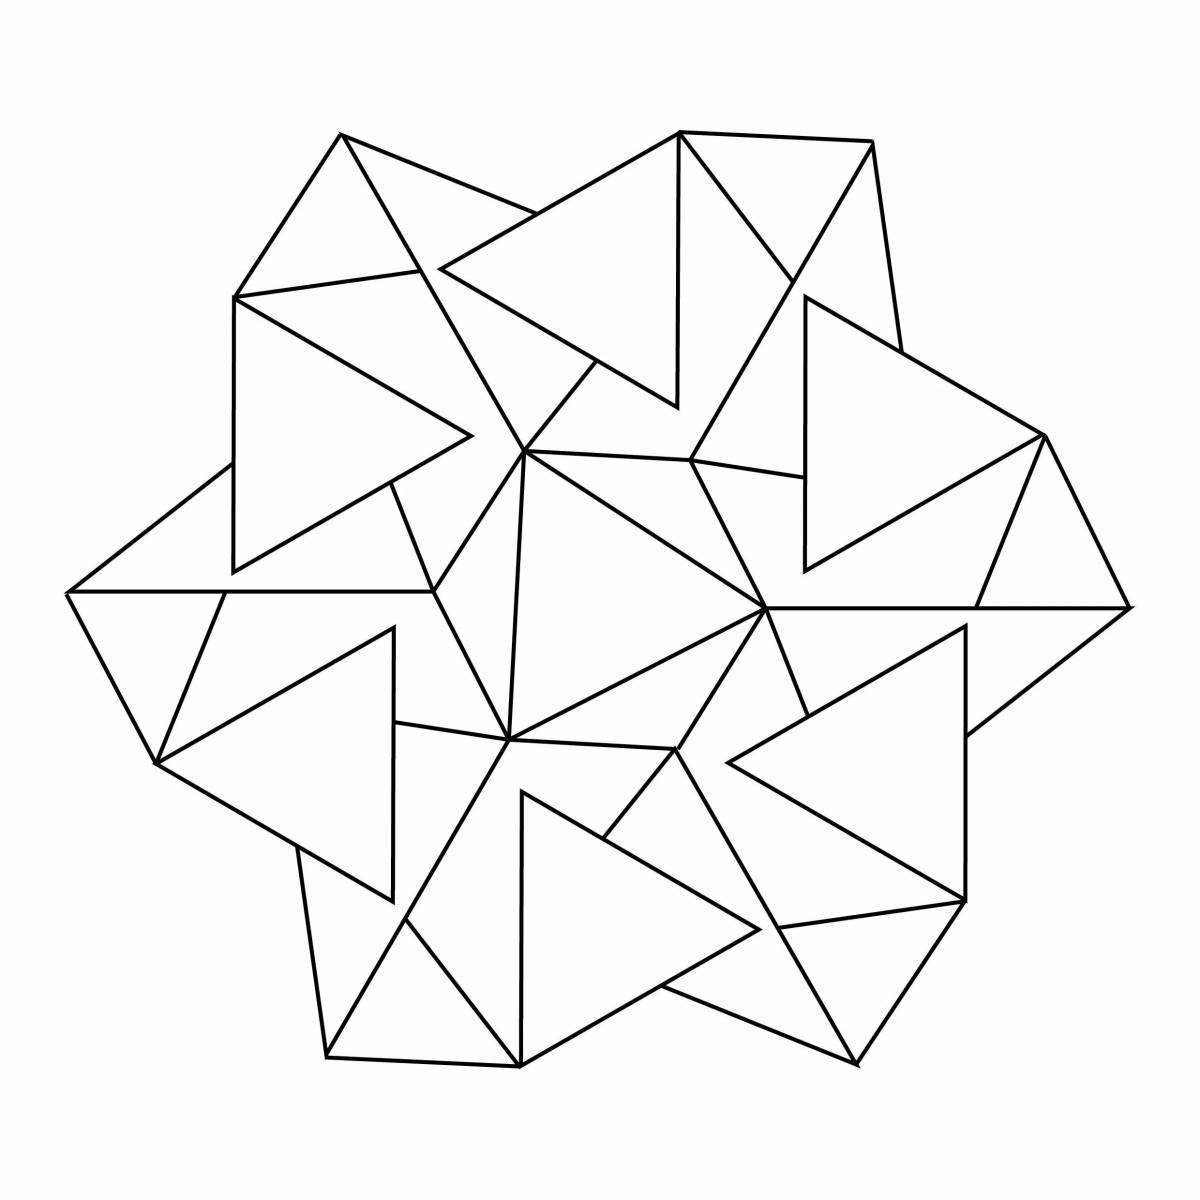 Exciting geometry coloring book